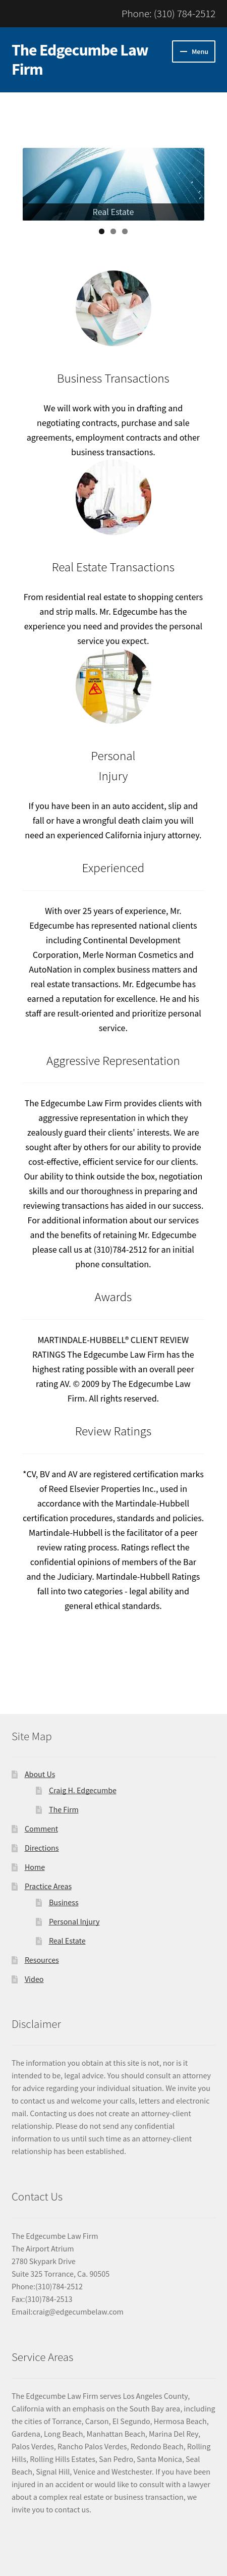 The Edgecumbe Law Firm - Torrance CA Lawyers